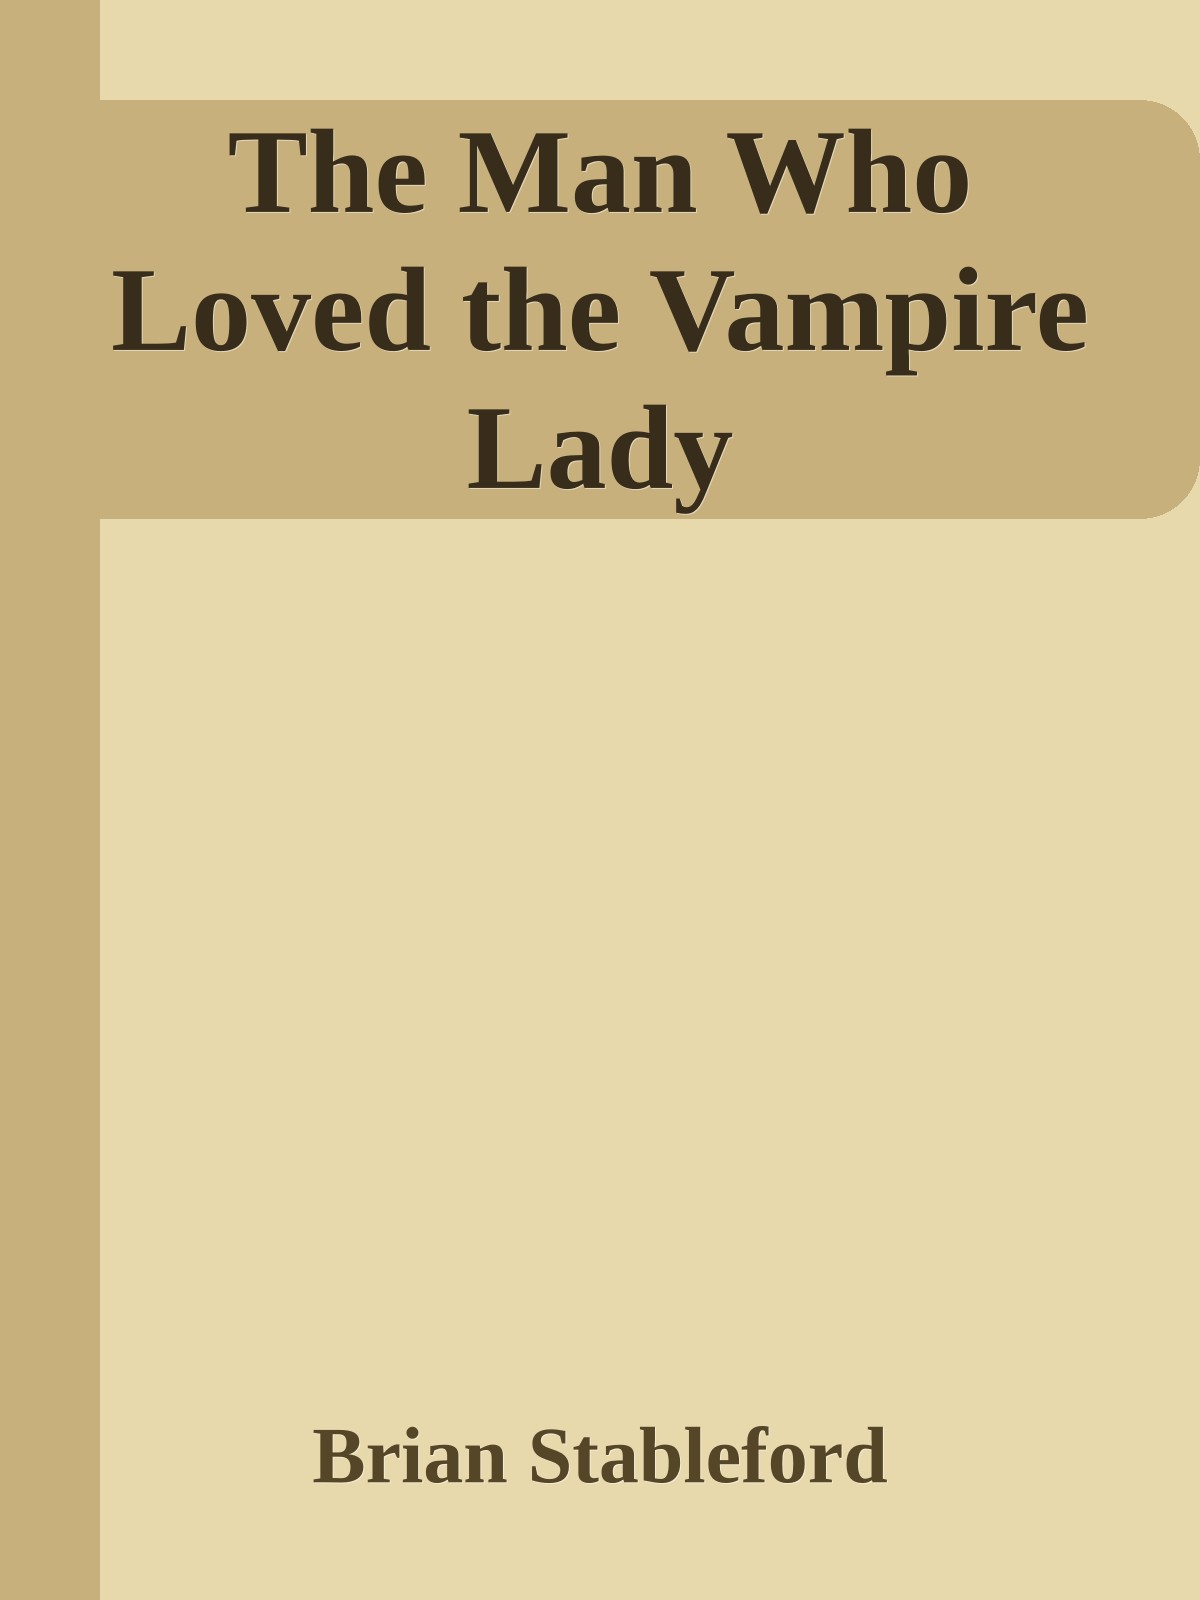 The Man Who Loved the Vampire Lady